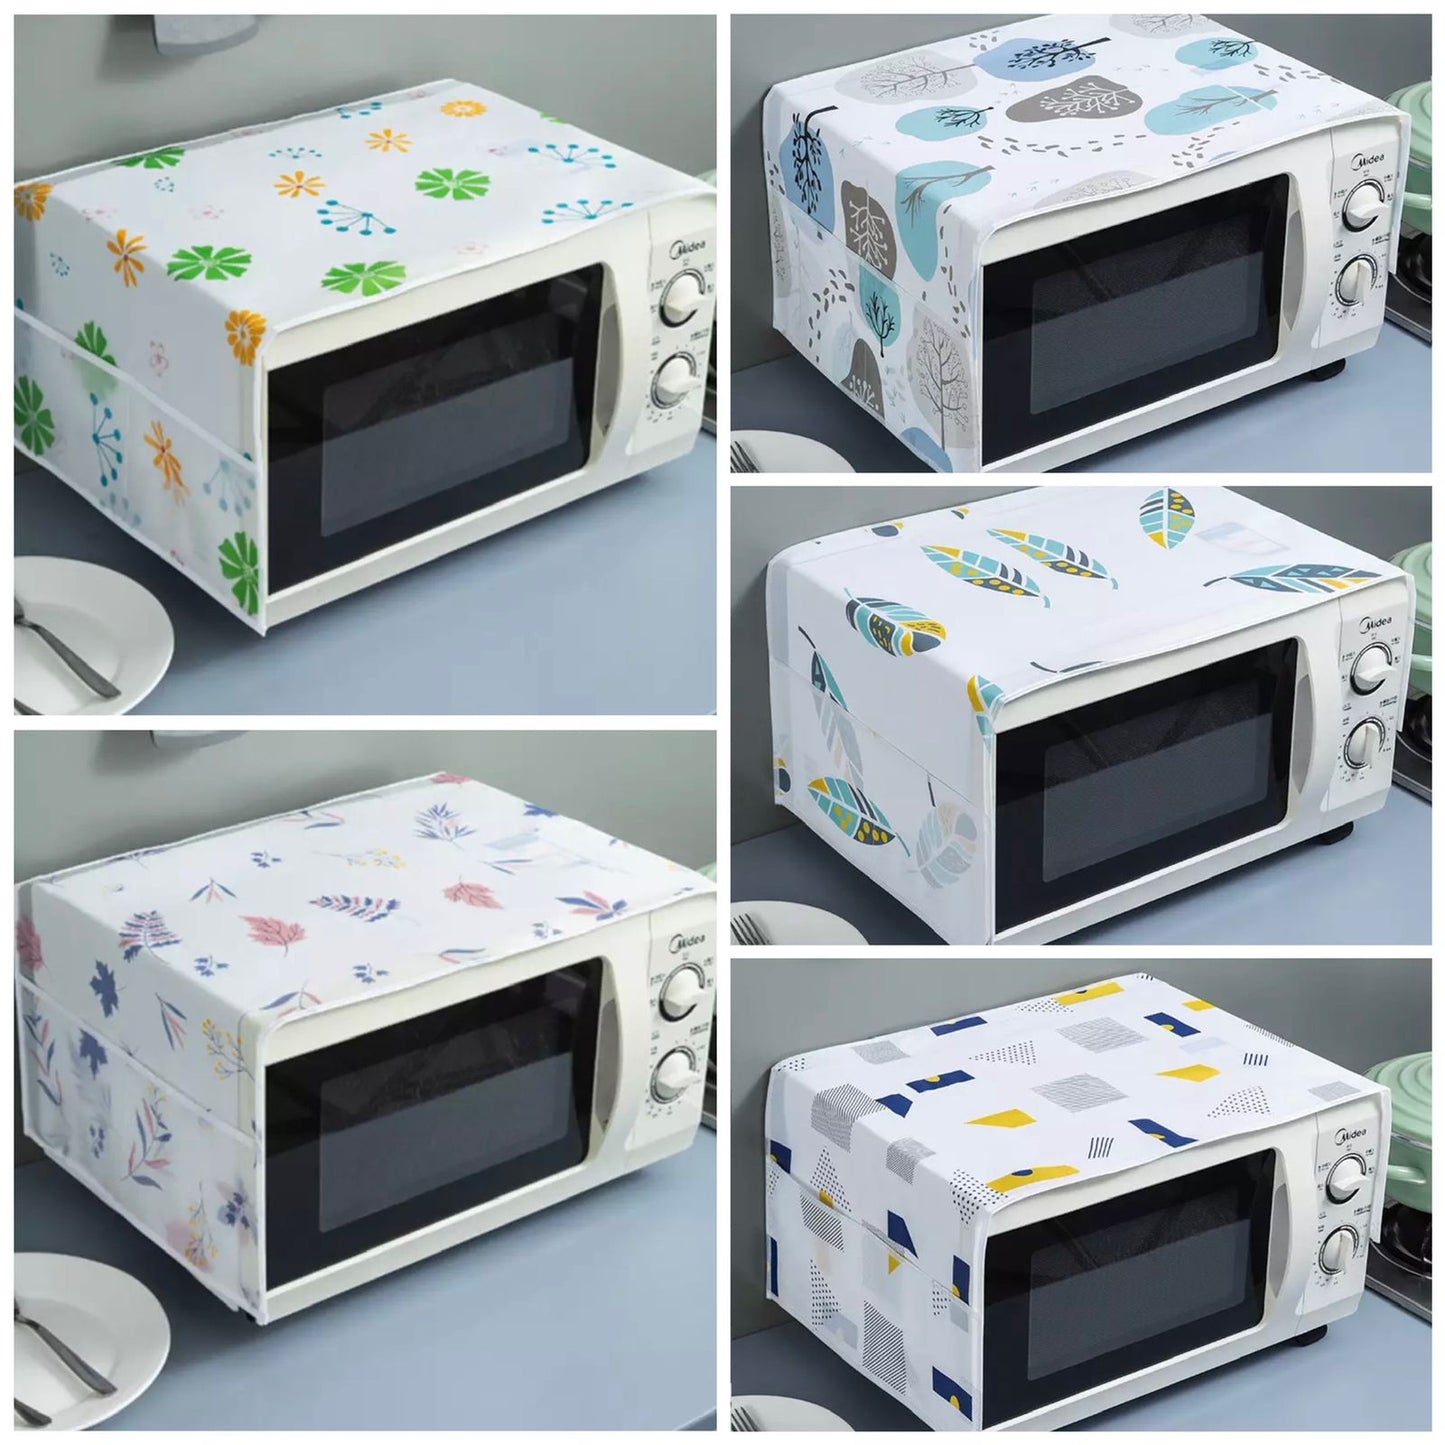 Oven Cover Kitchen Microwave Cover Waterproof Oil Dust Double Pockets Microwave Cover Oven Cover (Random Design) (Copy)